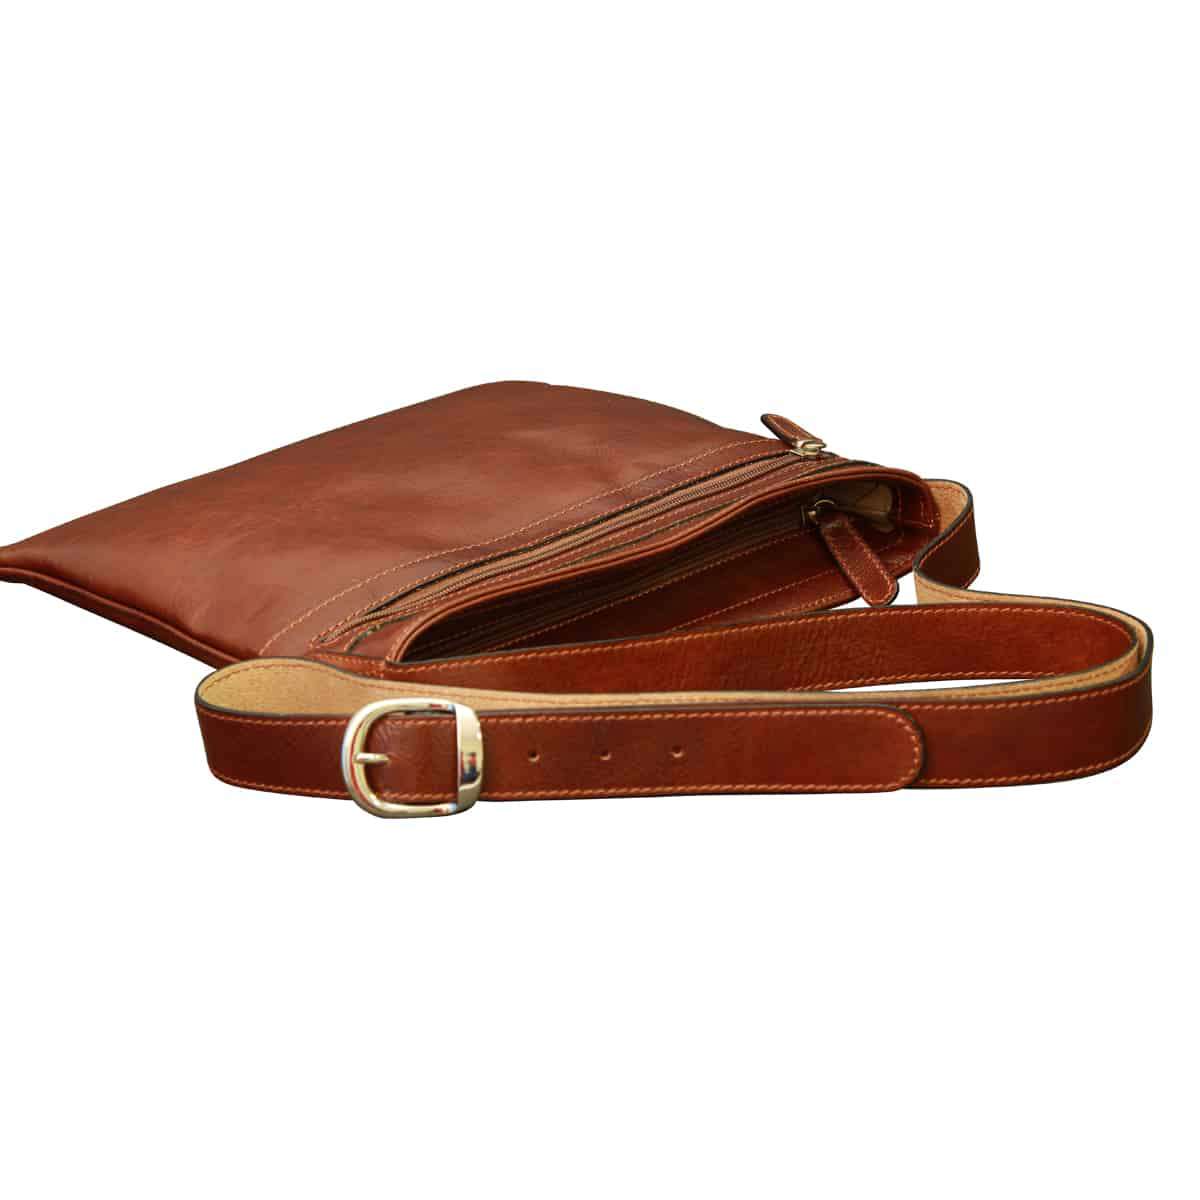 Leather Cross Body Bag - Brown | 069705MA US | Old Angler Firenze